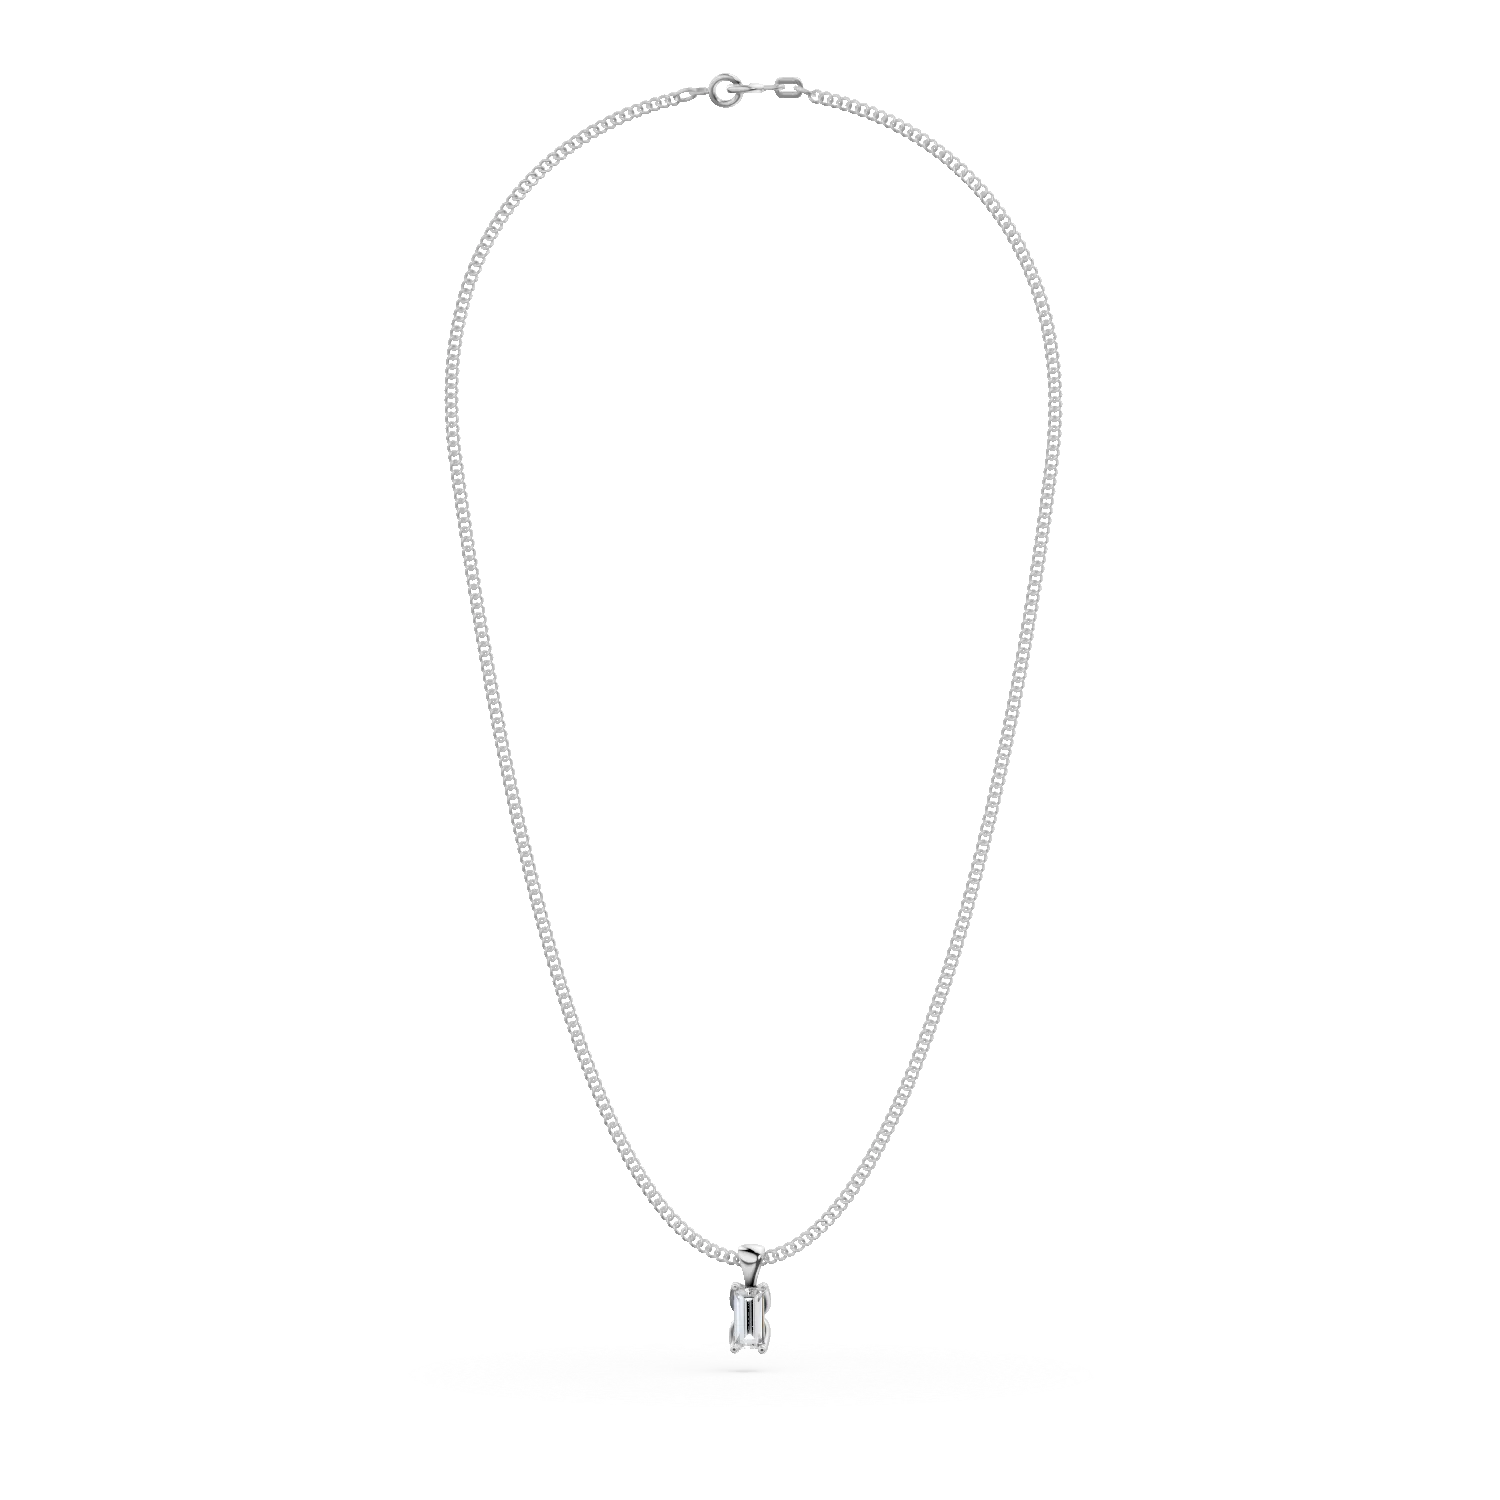 White gold Lotus pendant necklace with 0.2ct solitaire lab grown diamond